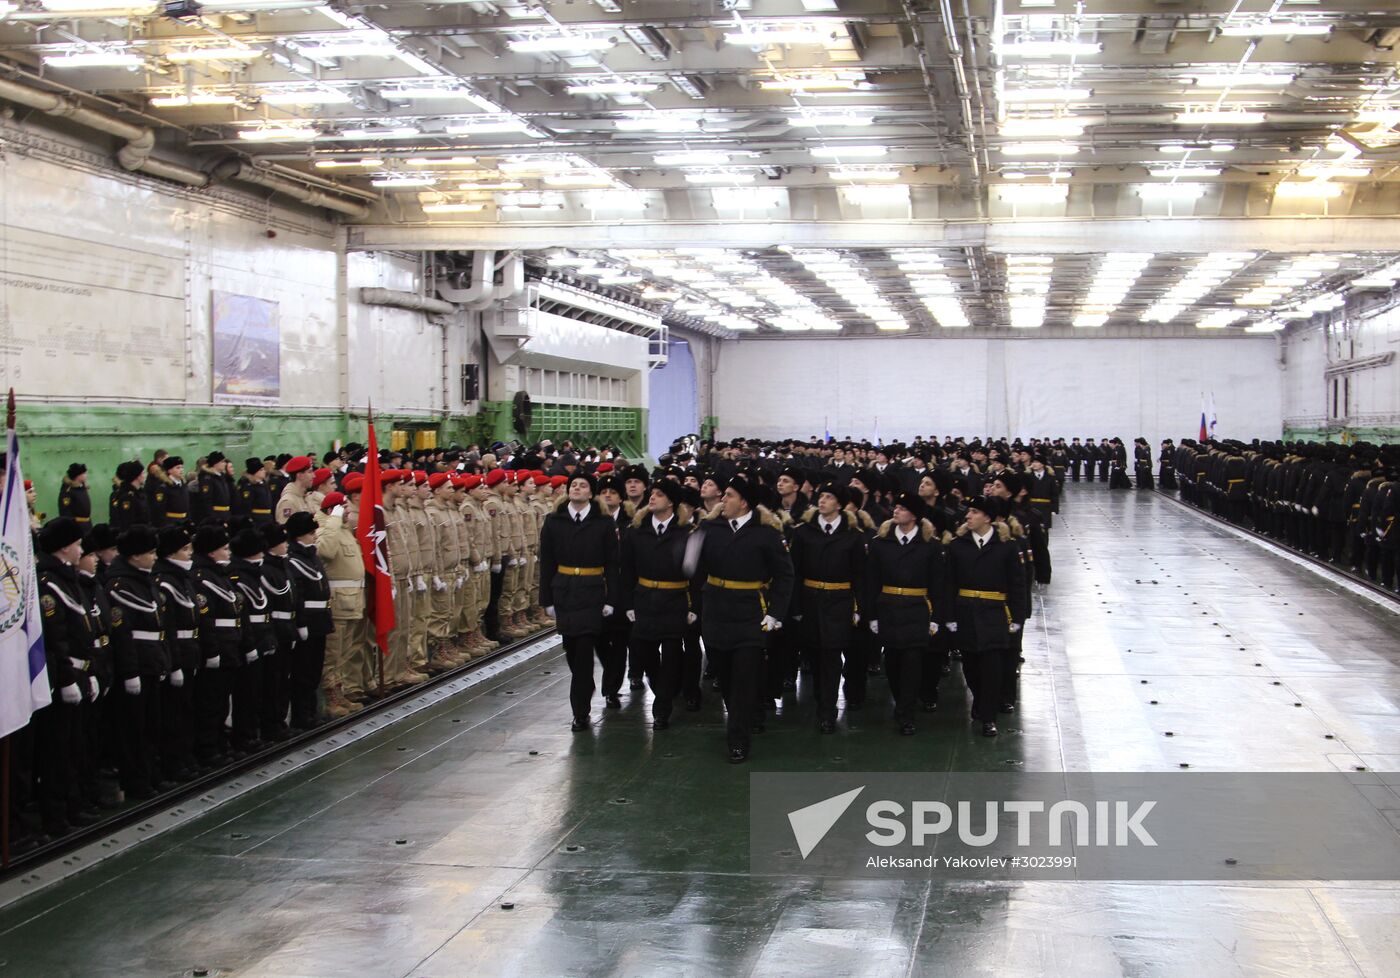 Admiral Kuznetsov aircraft carrier meeting ceremony in Severomorsk